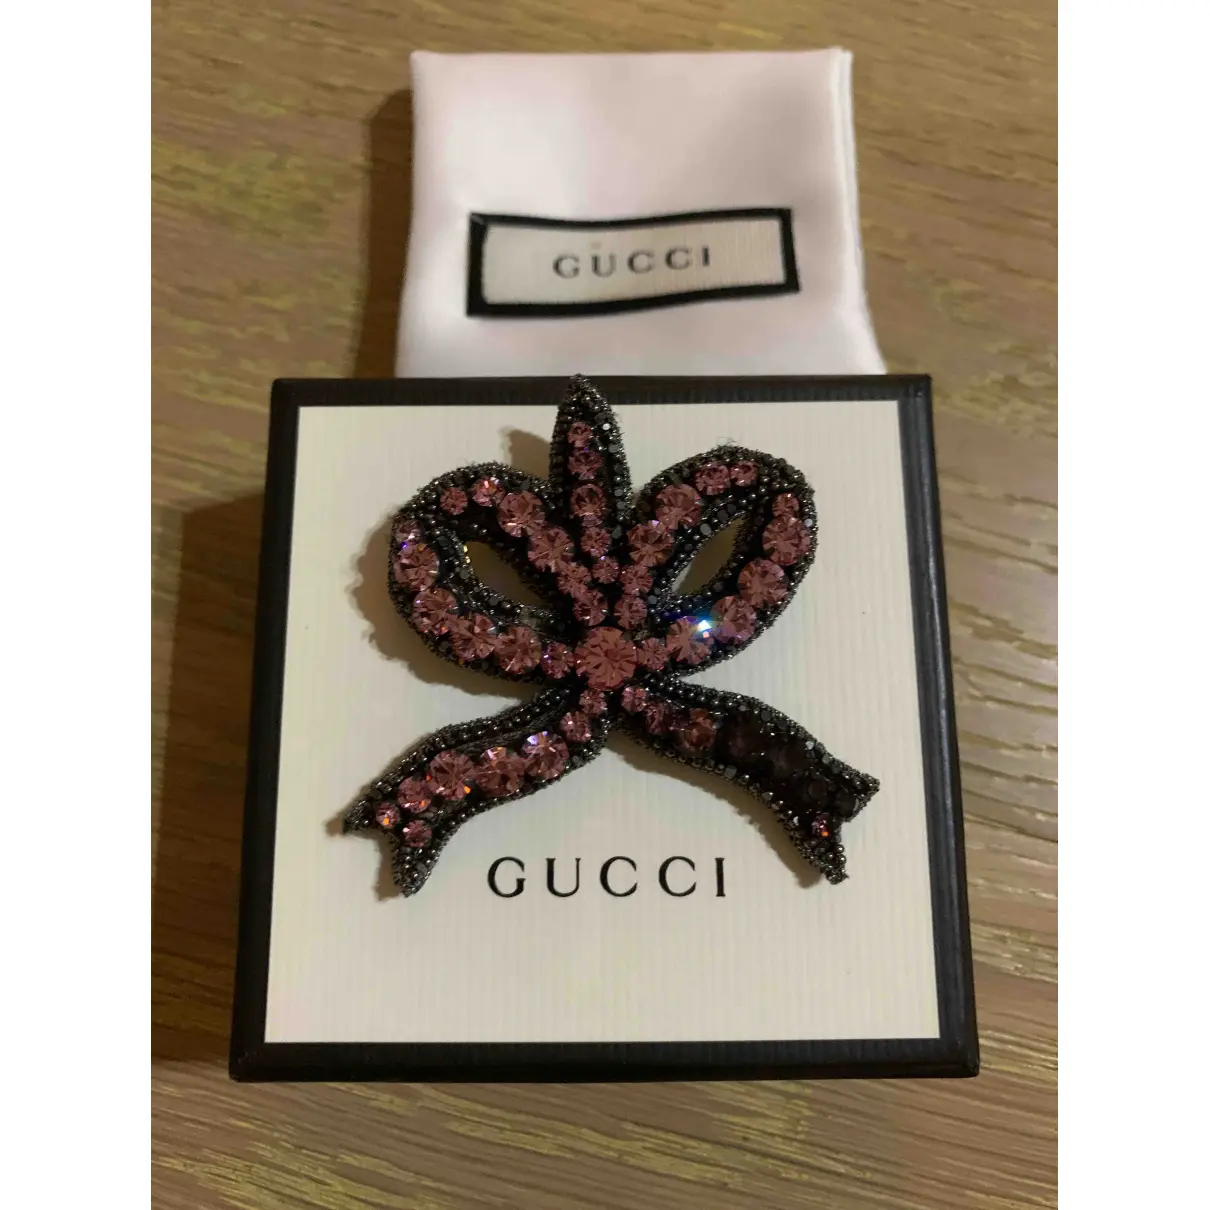 Buy Gucci Crystal pin & brooche online